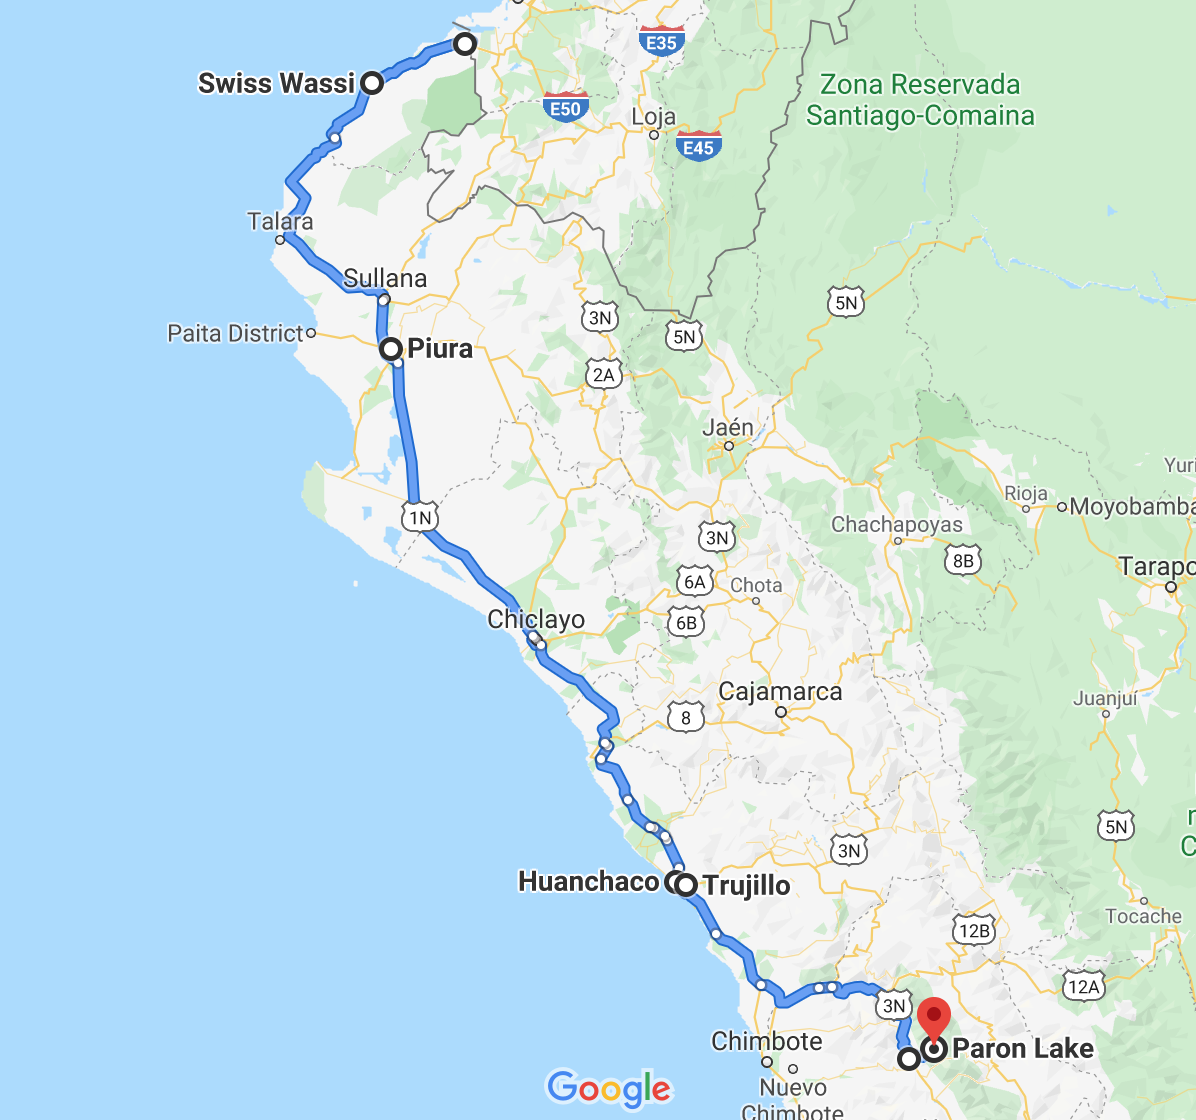 The route from the border of Peru to Laguna Parón